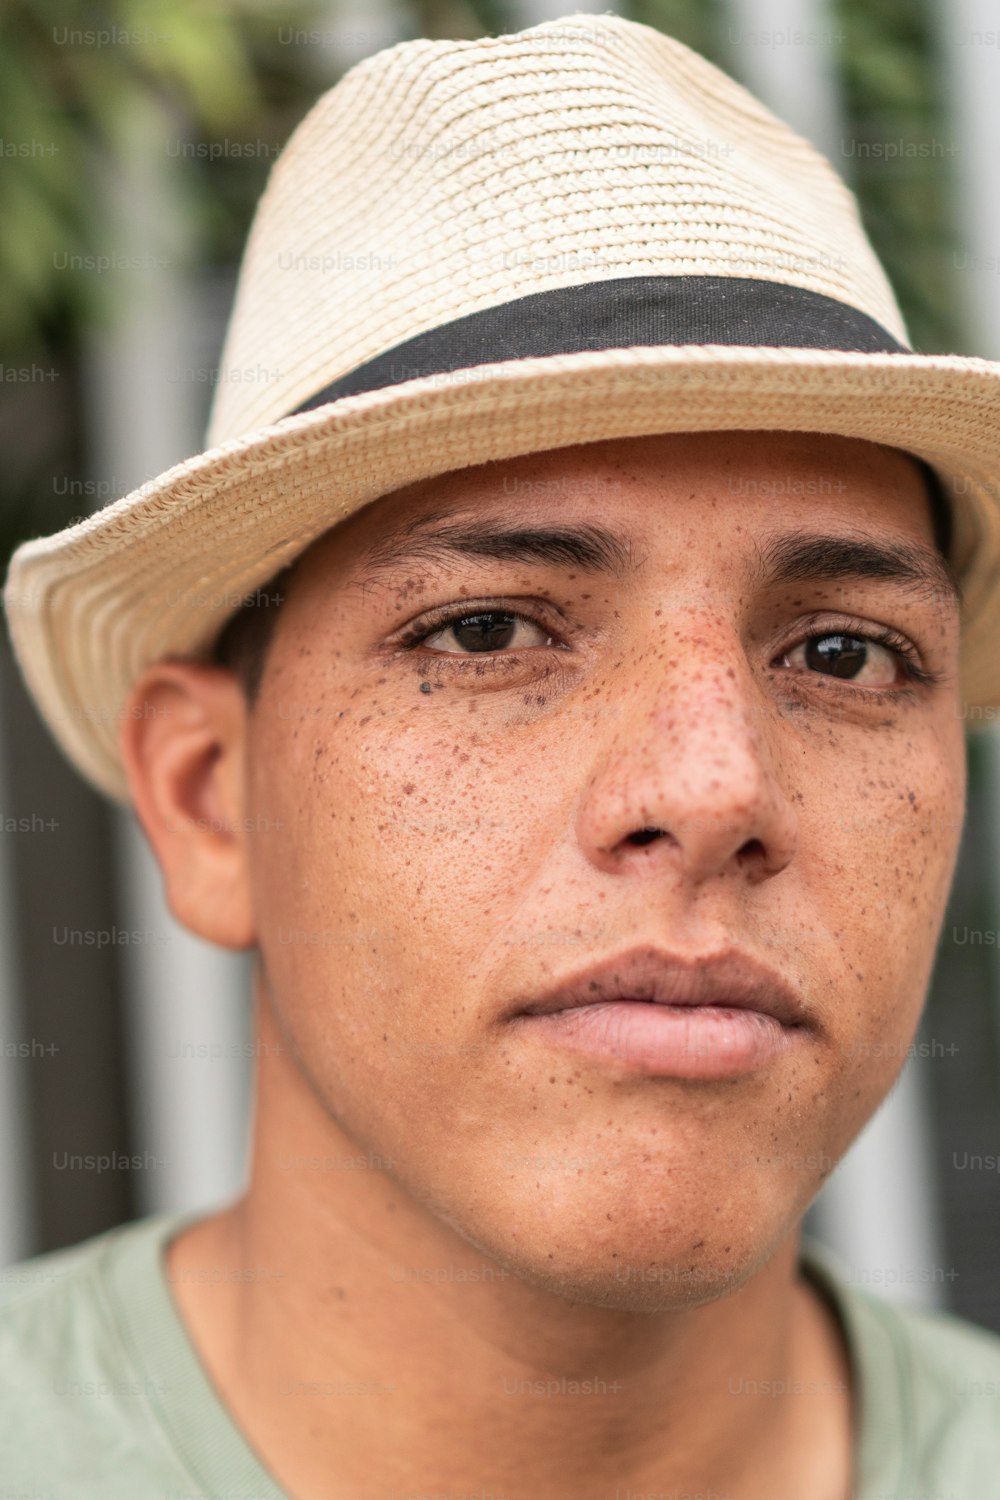 Freckled man wearing a hat on the street